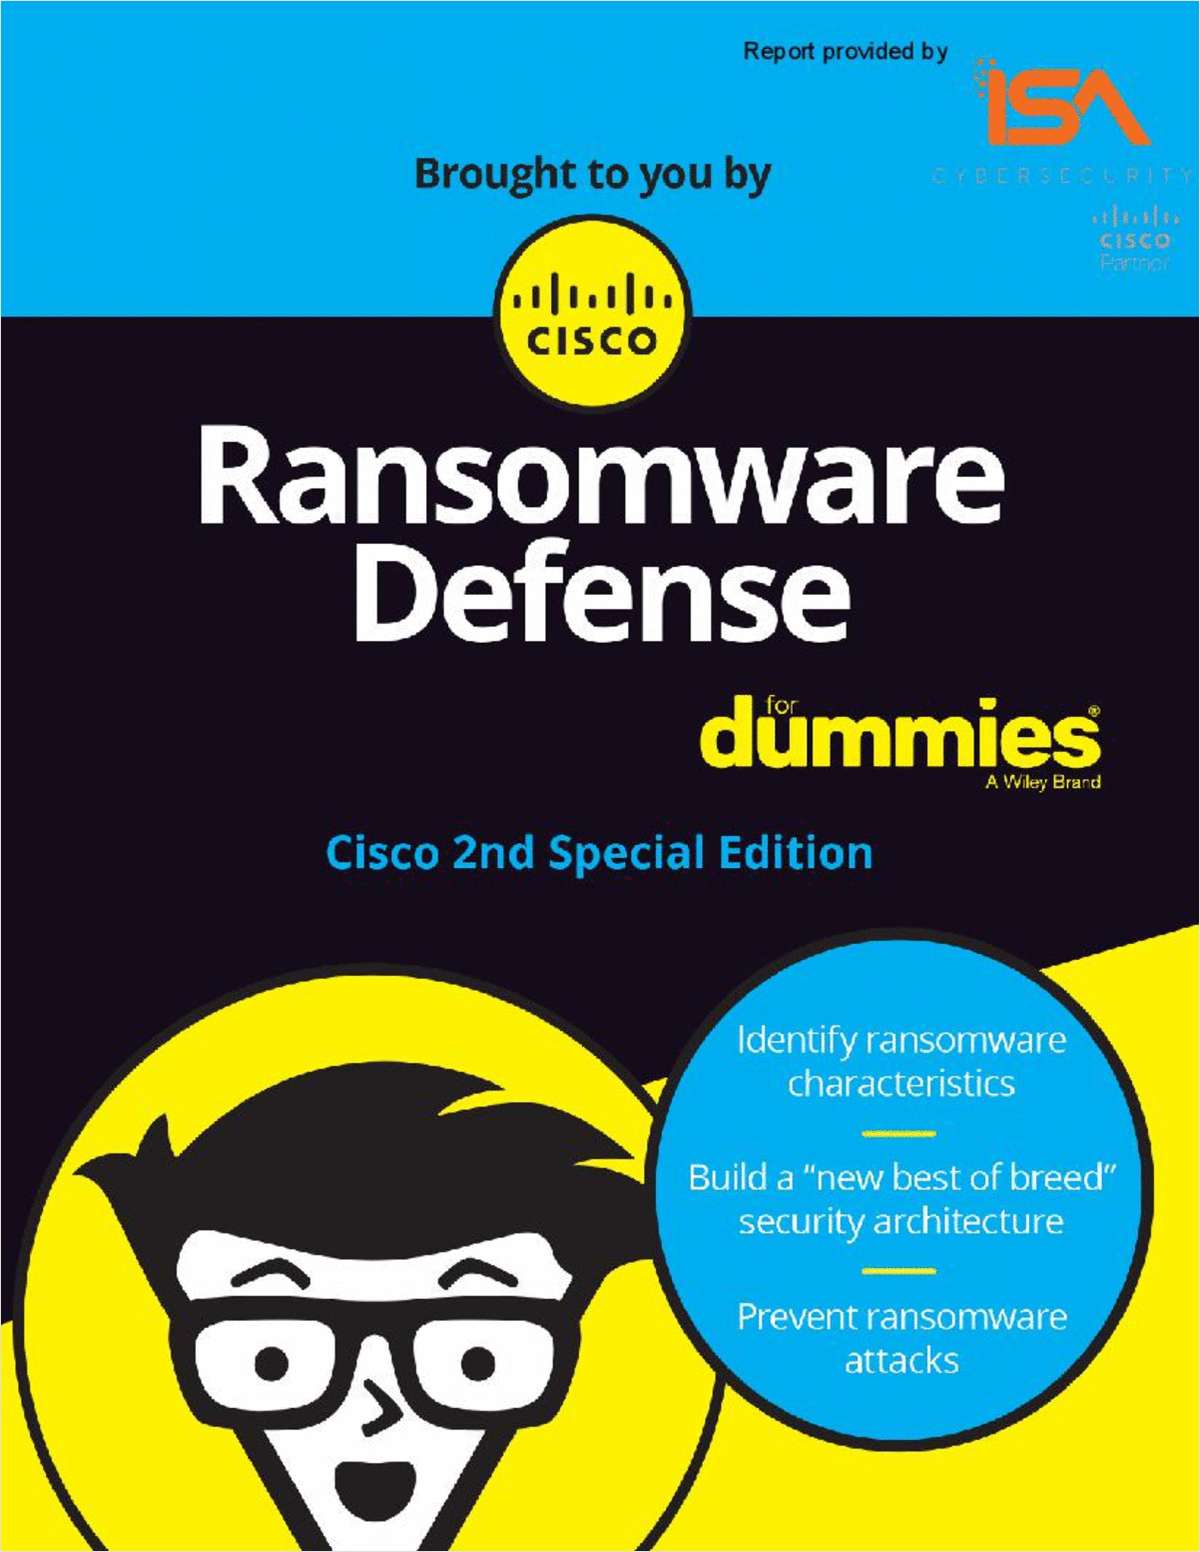 Ransomware Defense for Dummies Ebook